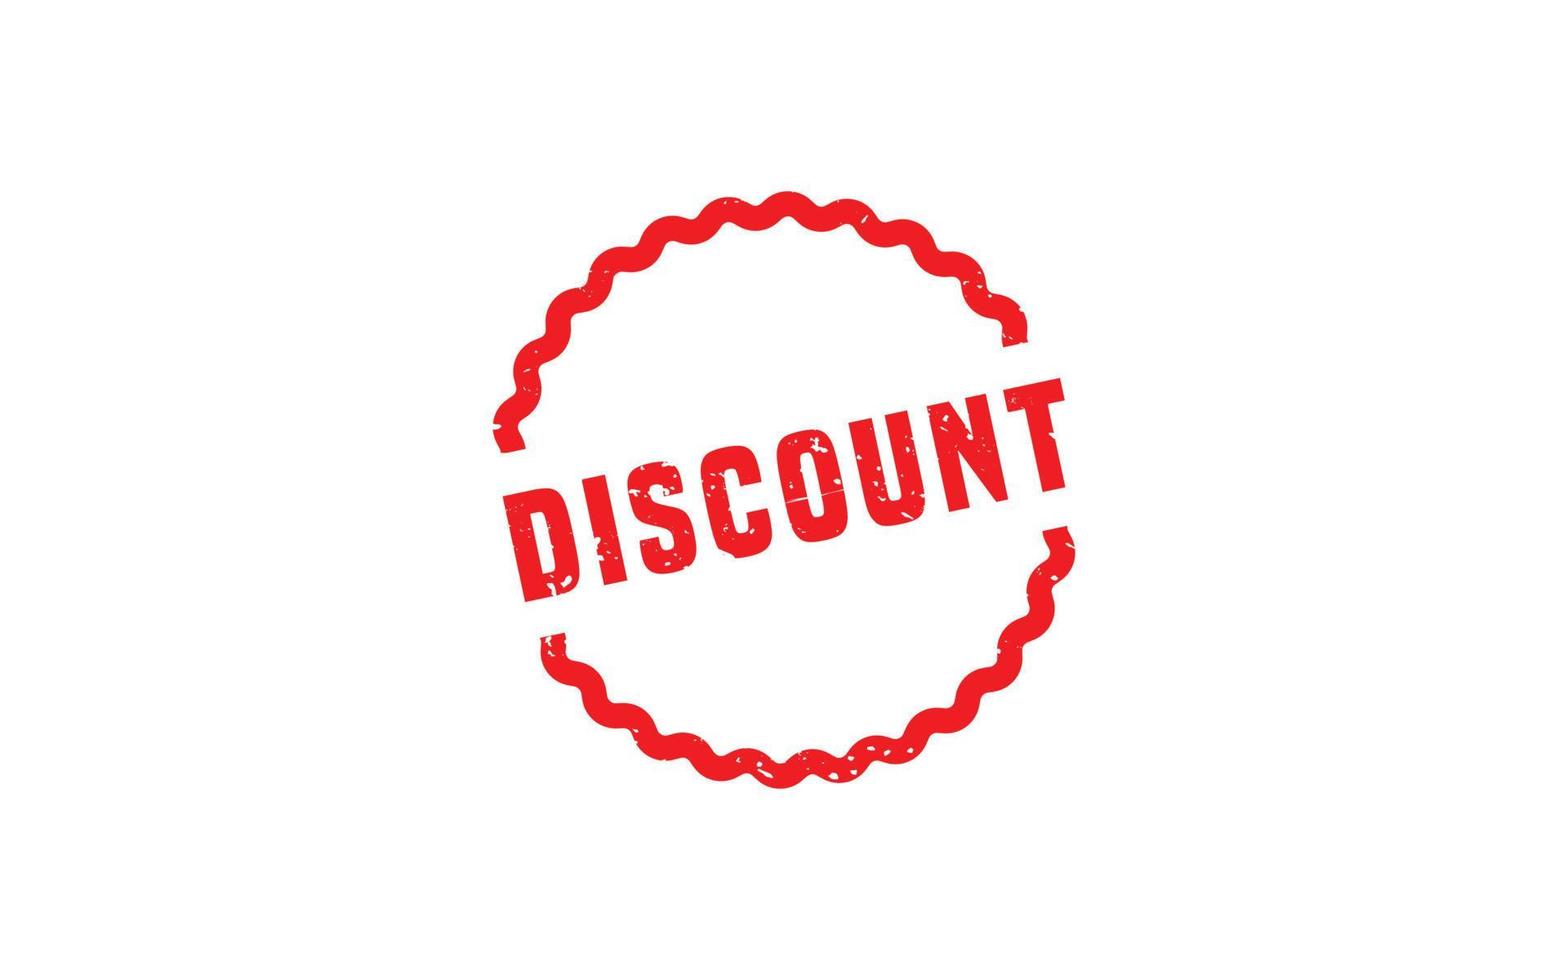 DISCOUNT rubber stamp with grunge style on white background vector